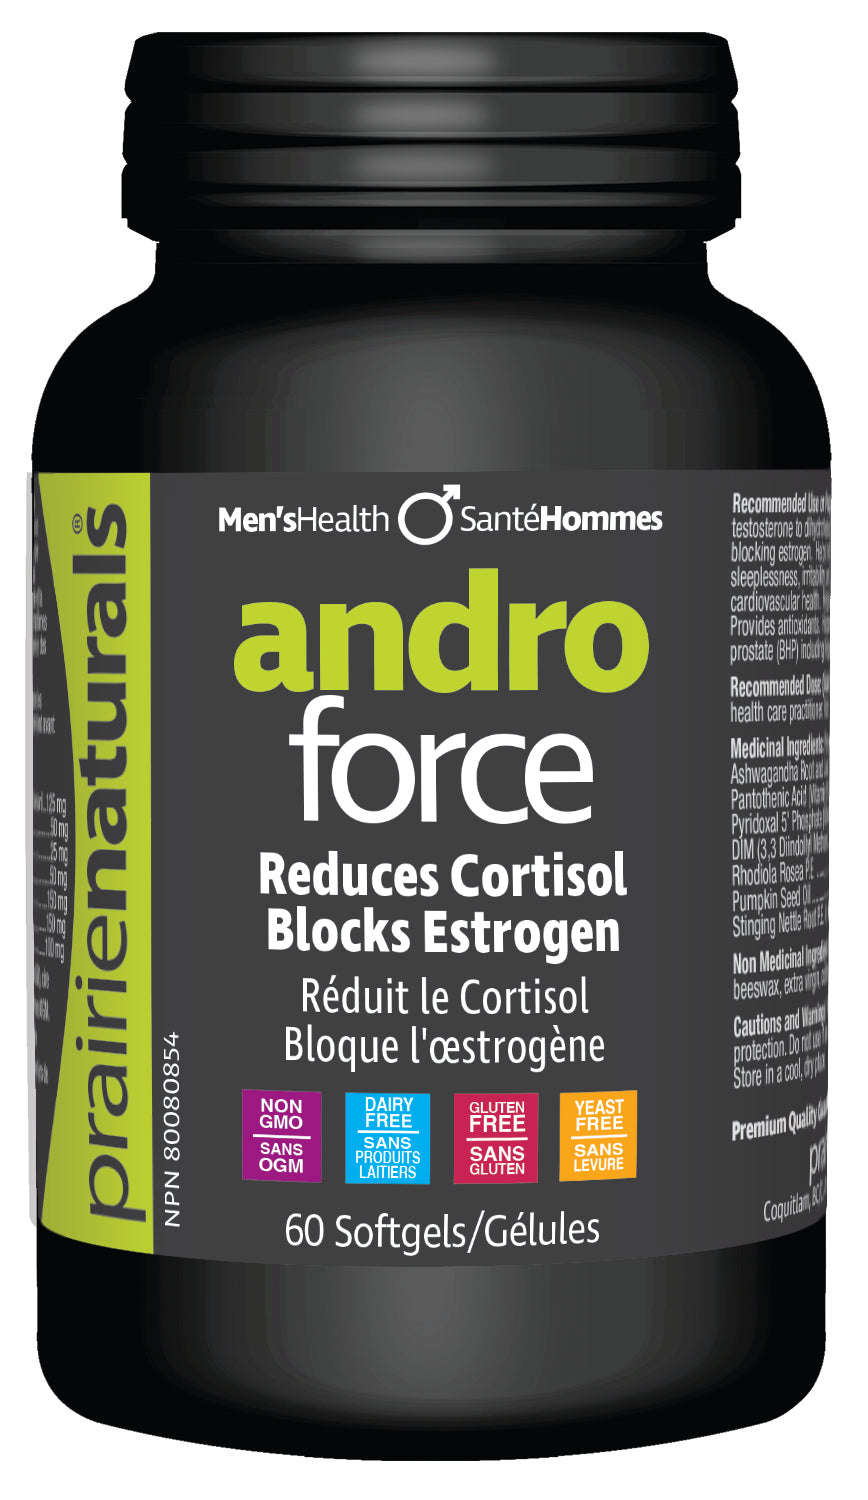 Andro force 60gels